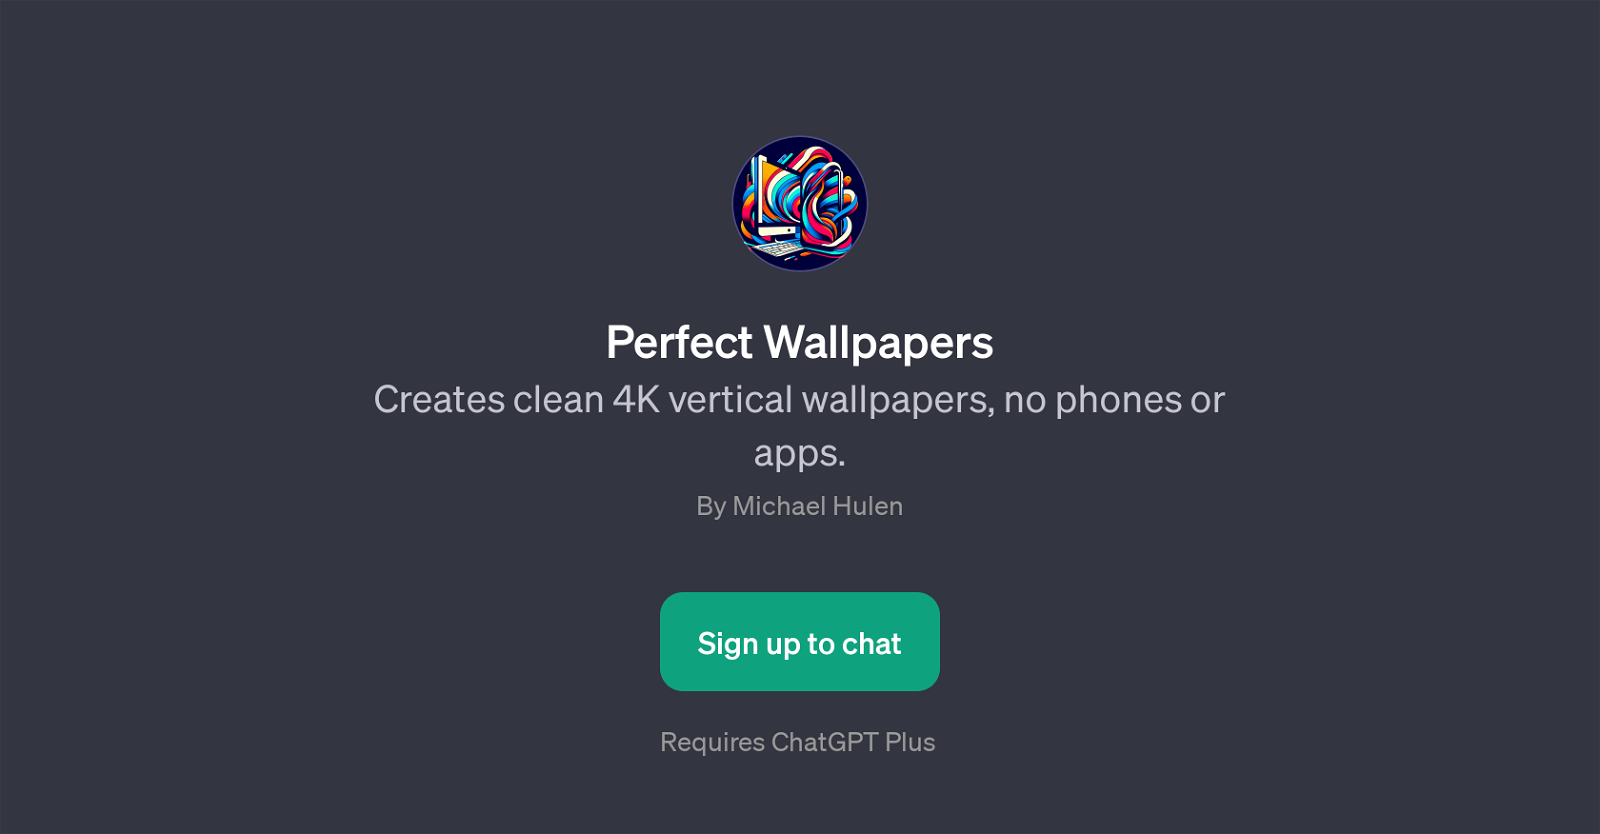 Perfect Wallpapers website